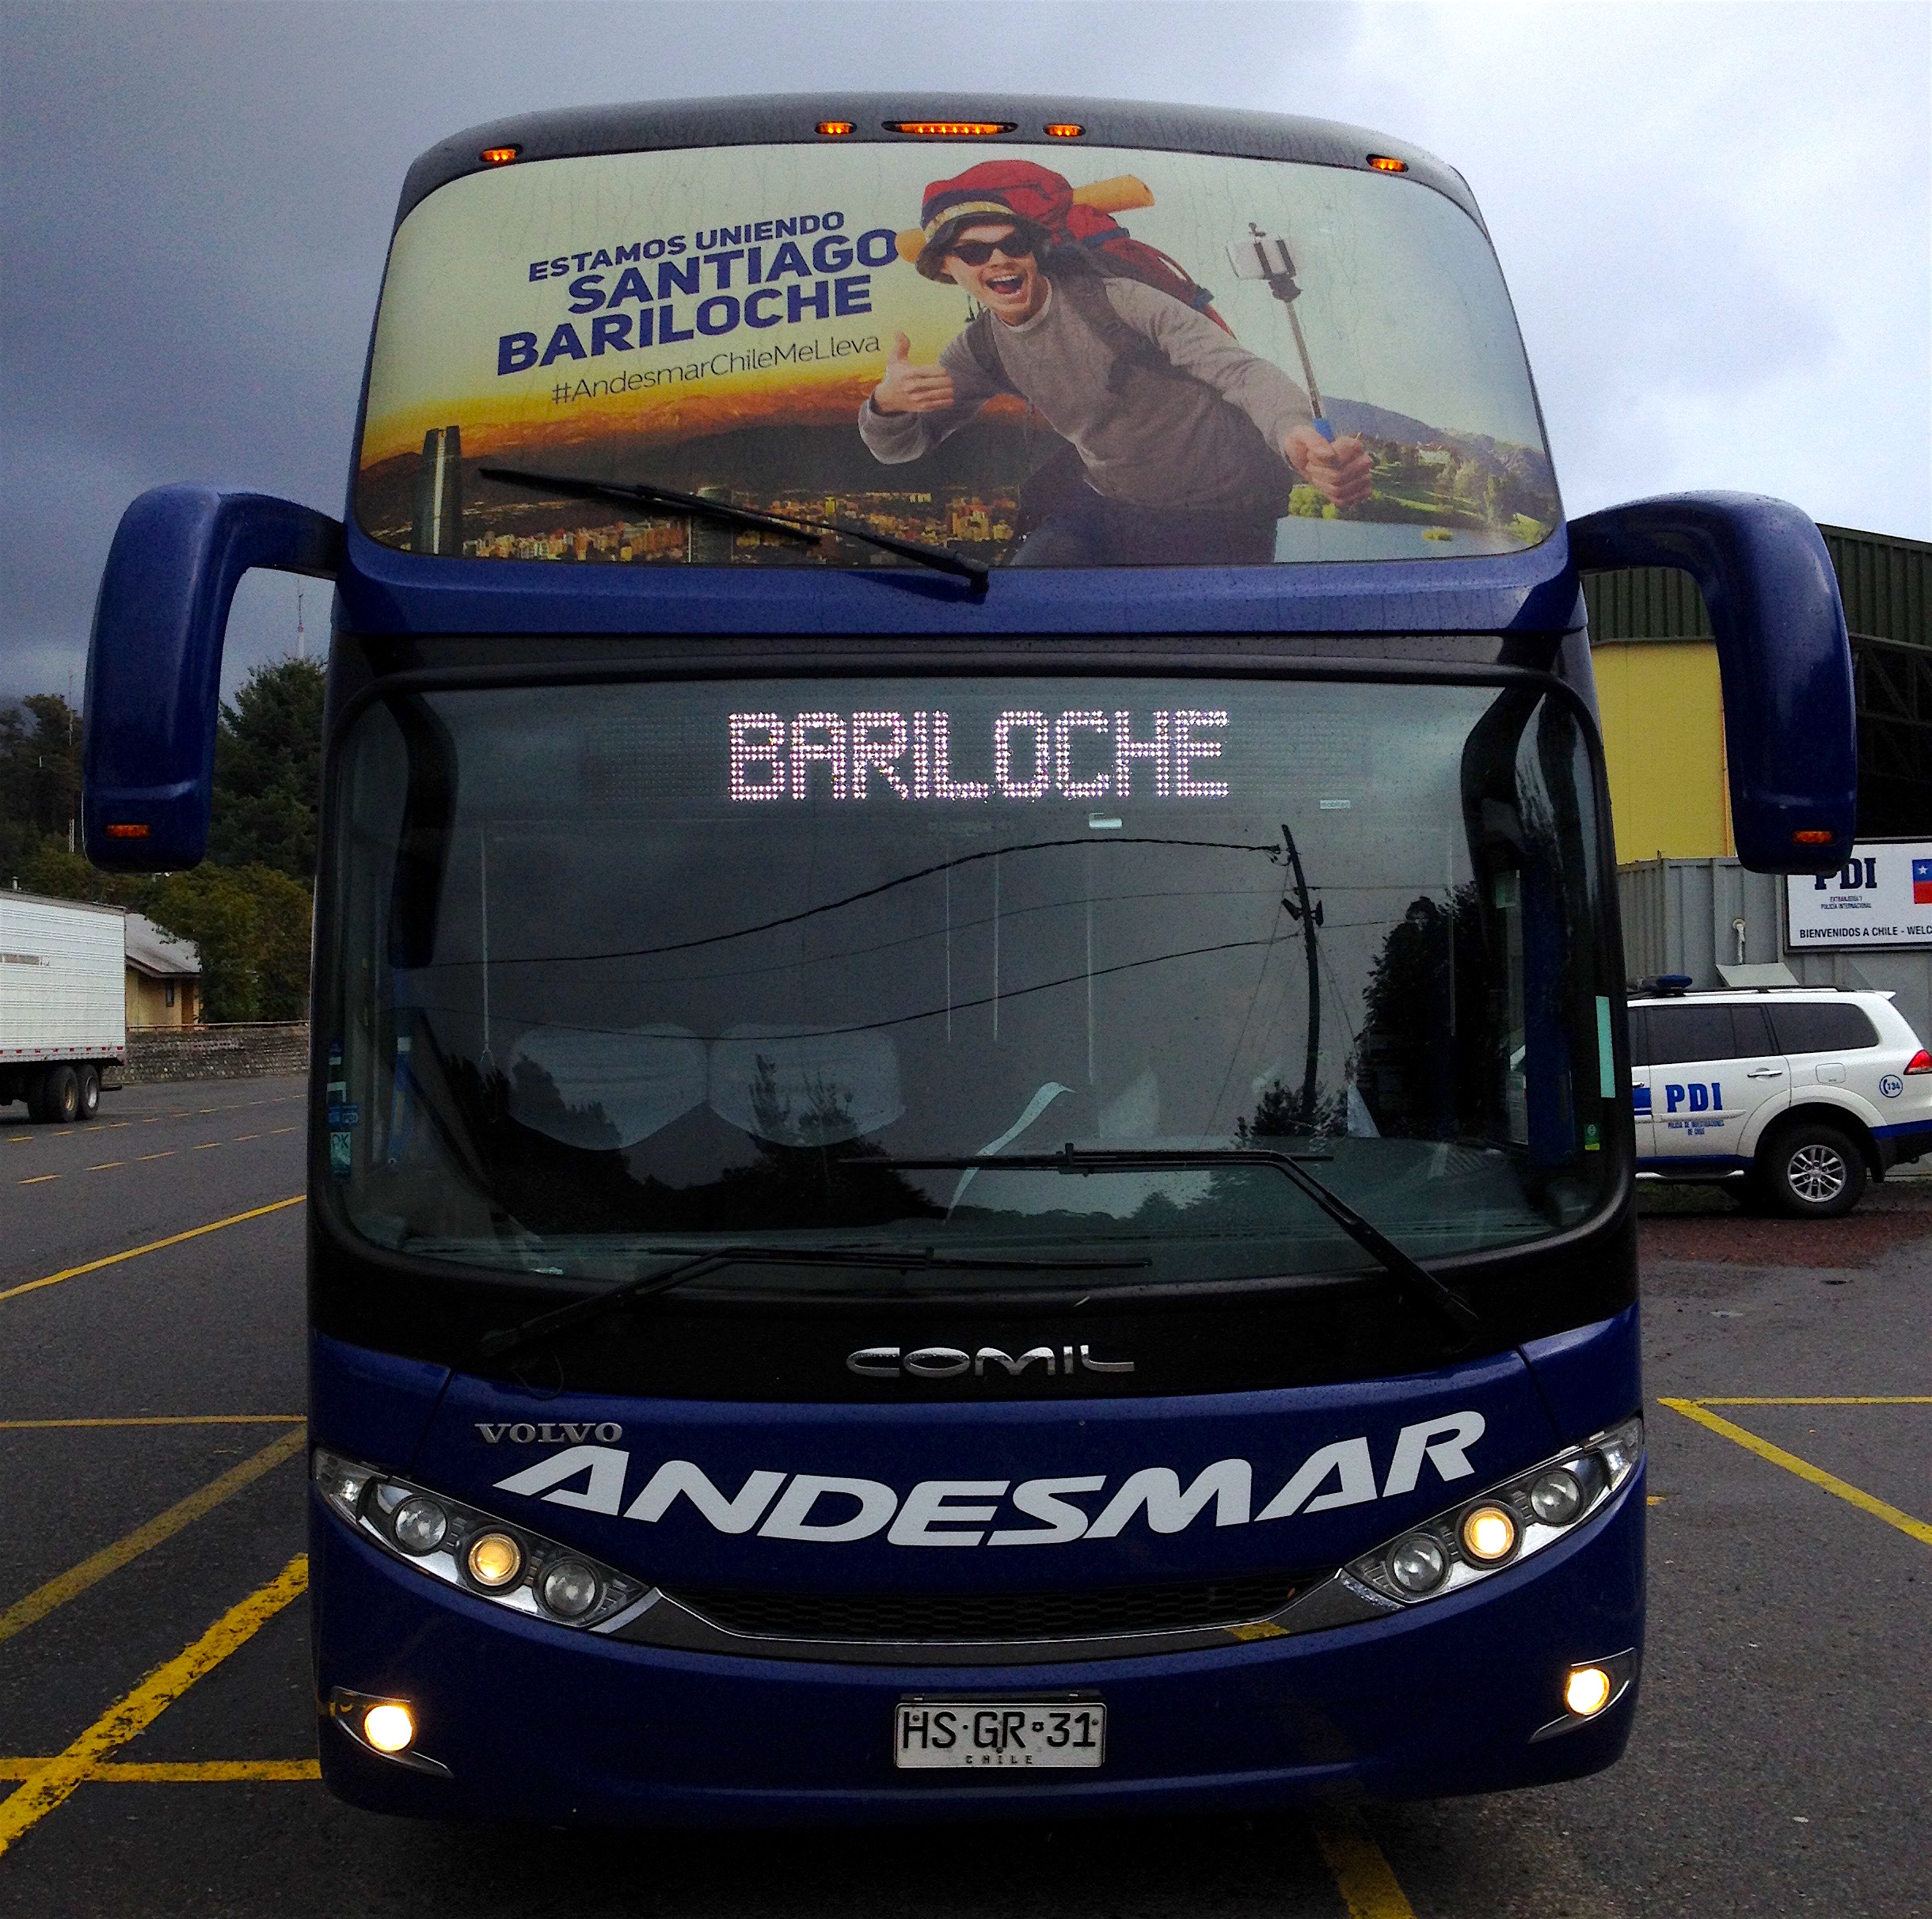 The AndesMar Bus at the Chilean border. photo: snowbrains